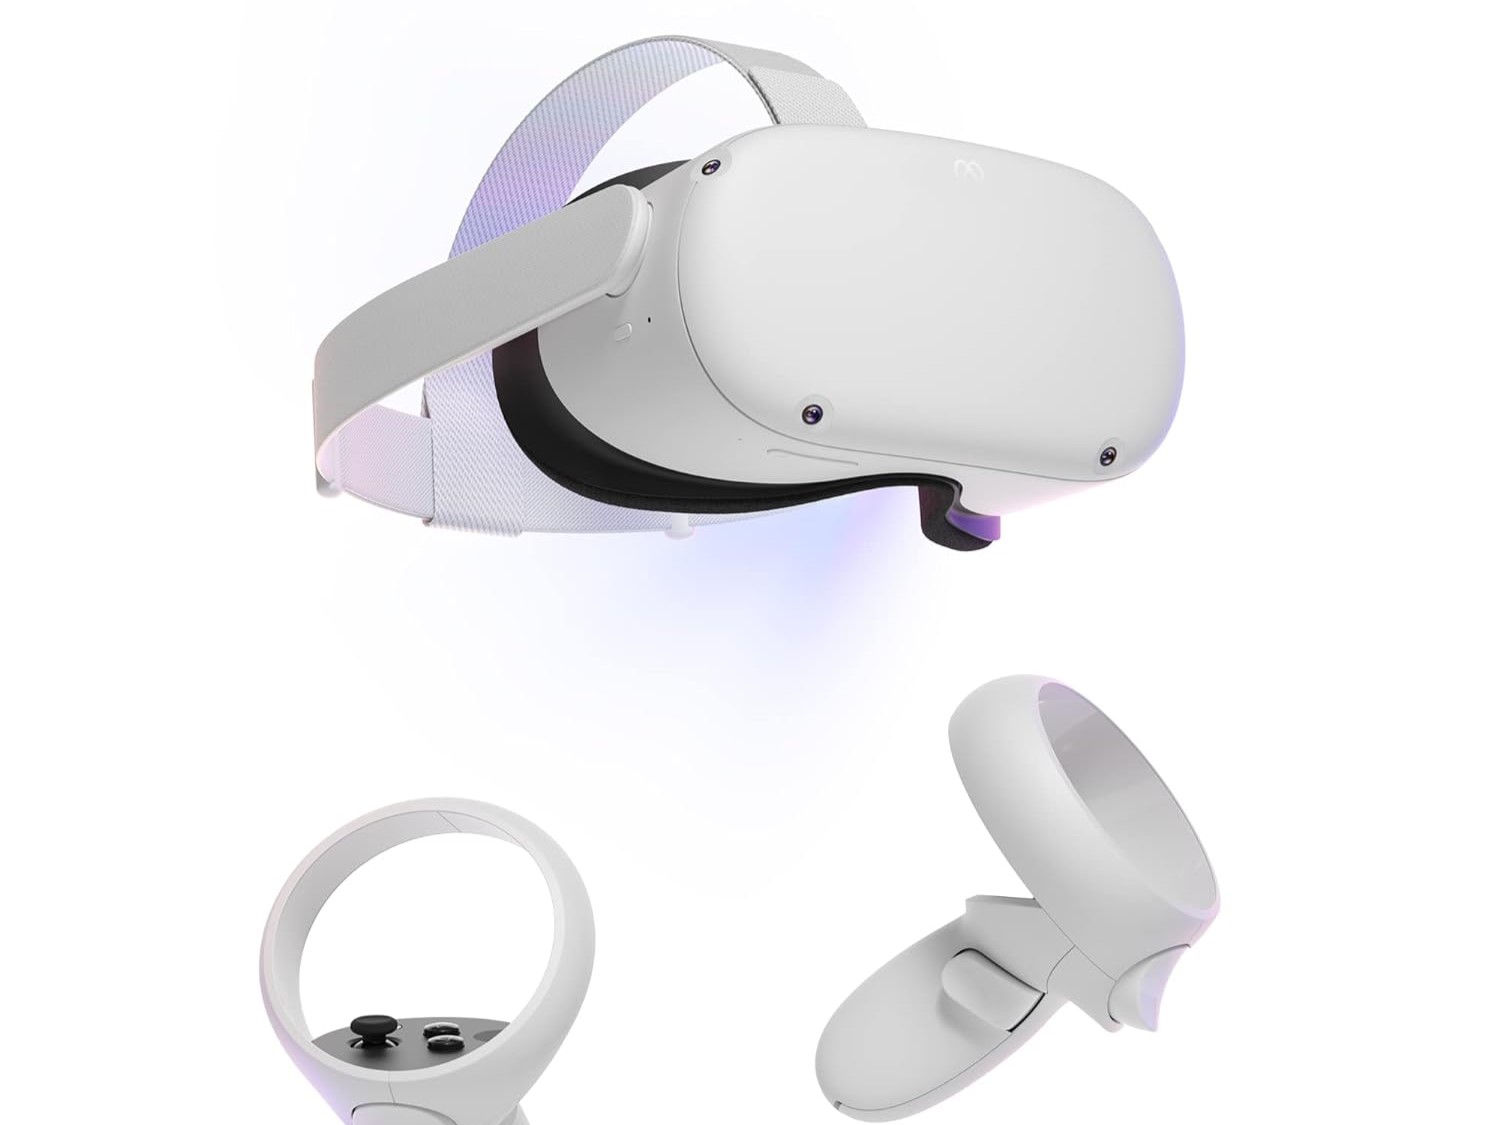 Meta Quest: VR headset gets a price cut, accessories also become cheaper